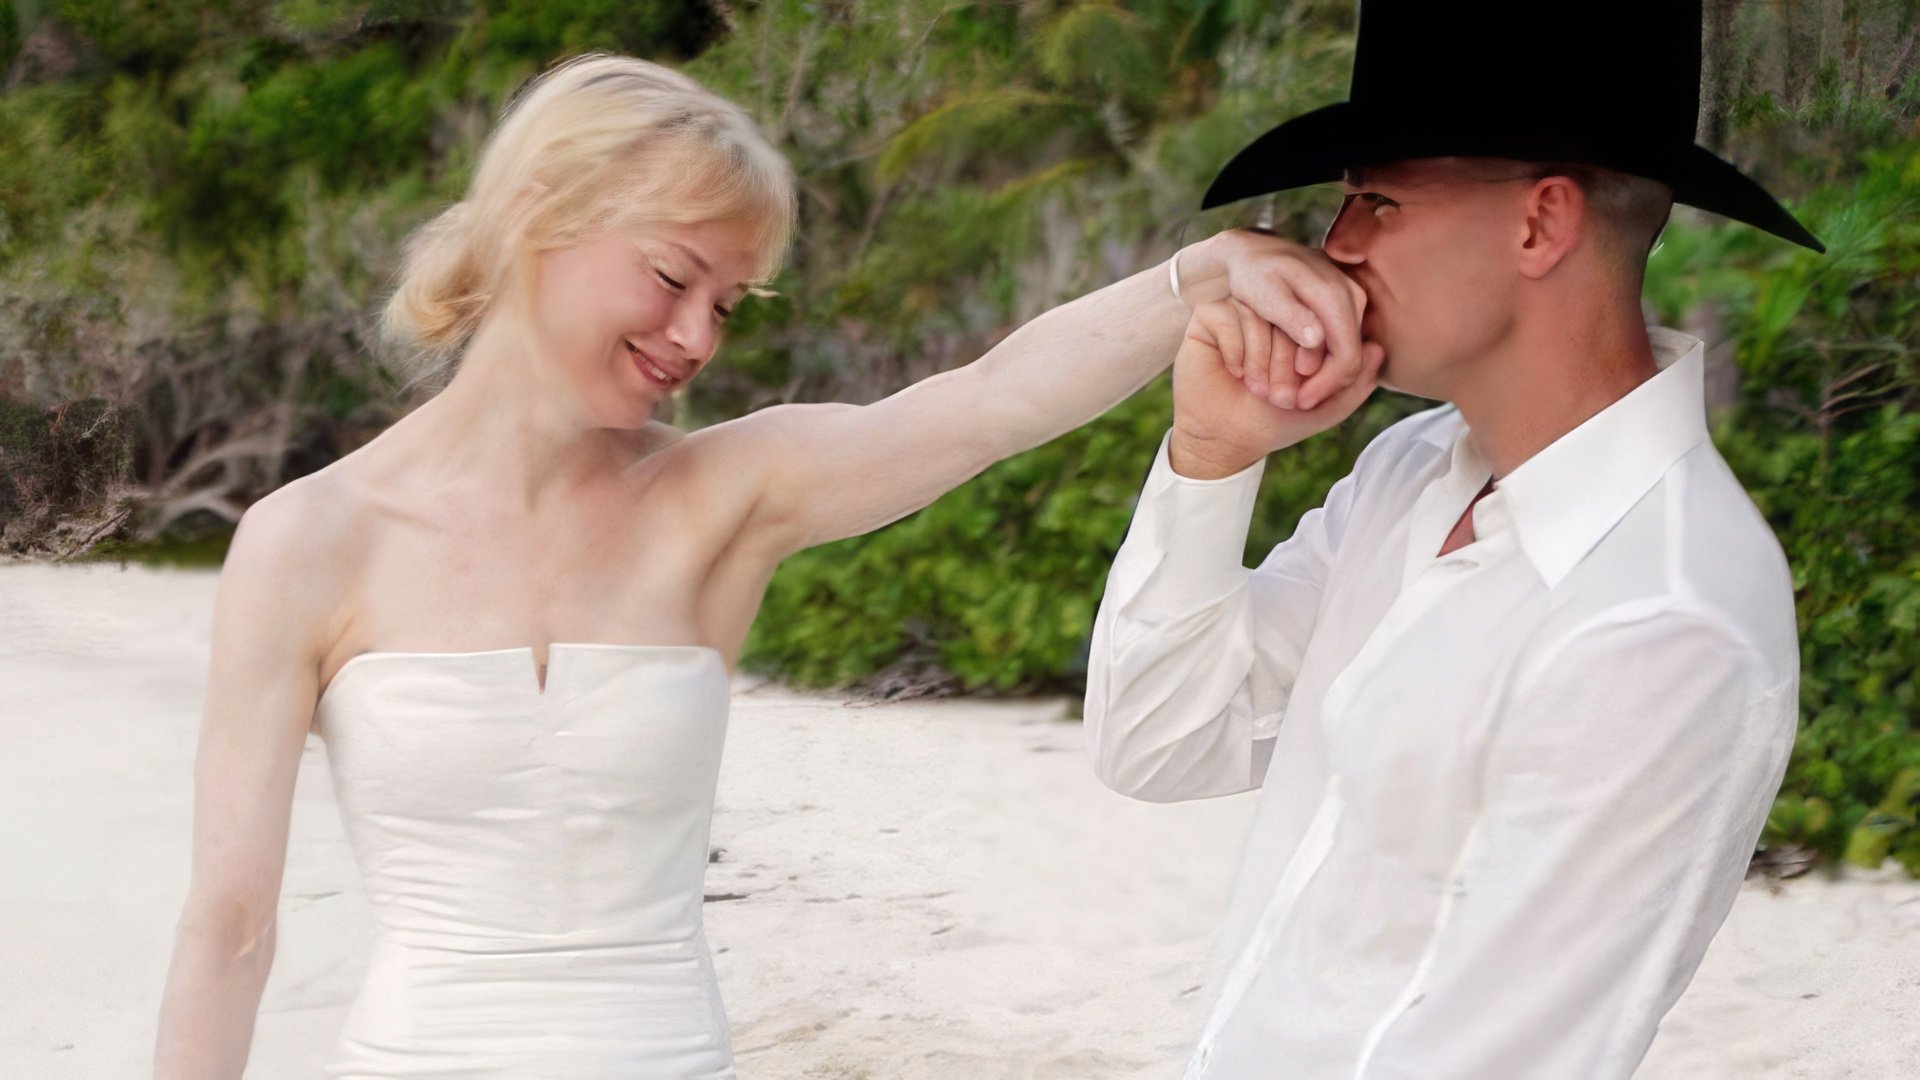 Renée Zellweger's marriage to Kenny Chesney lasted less than six months